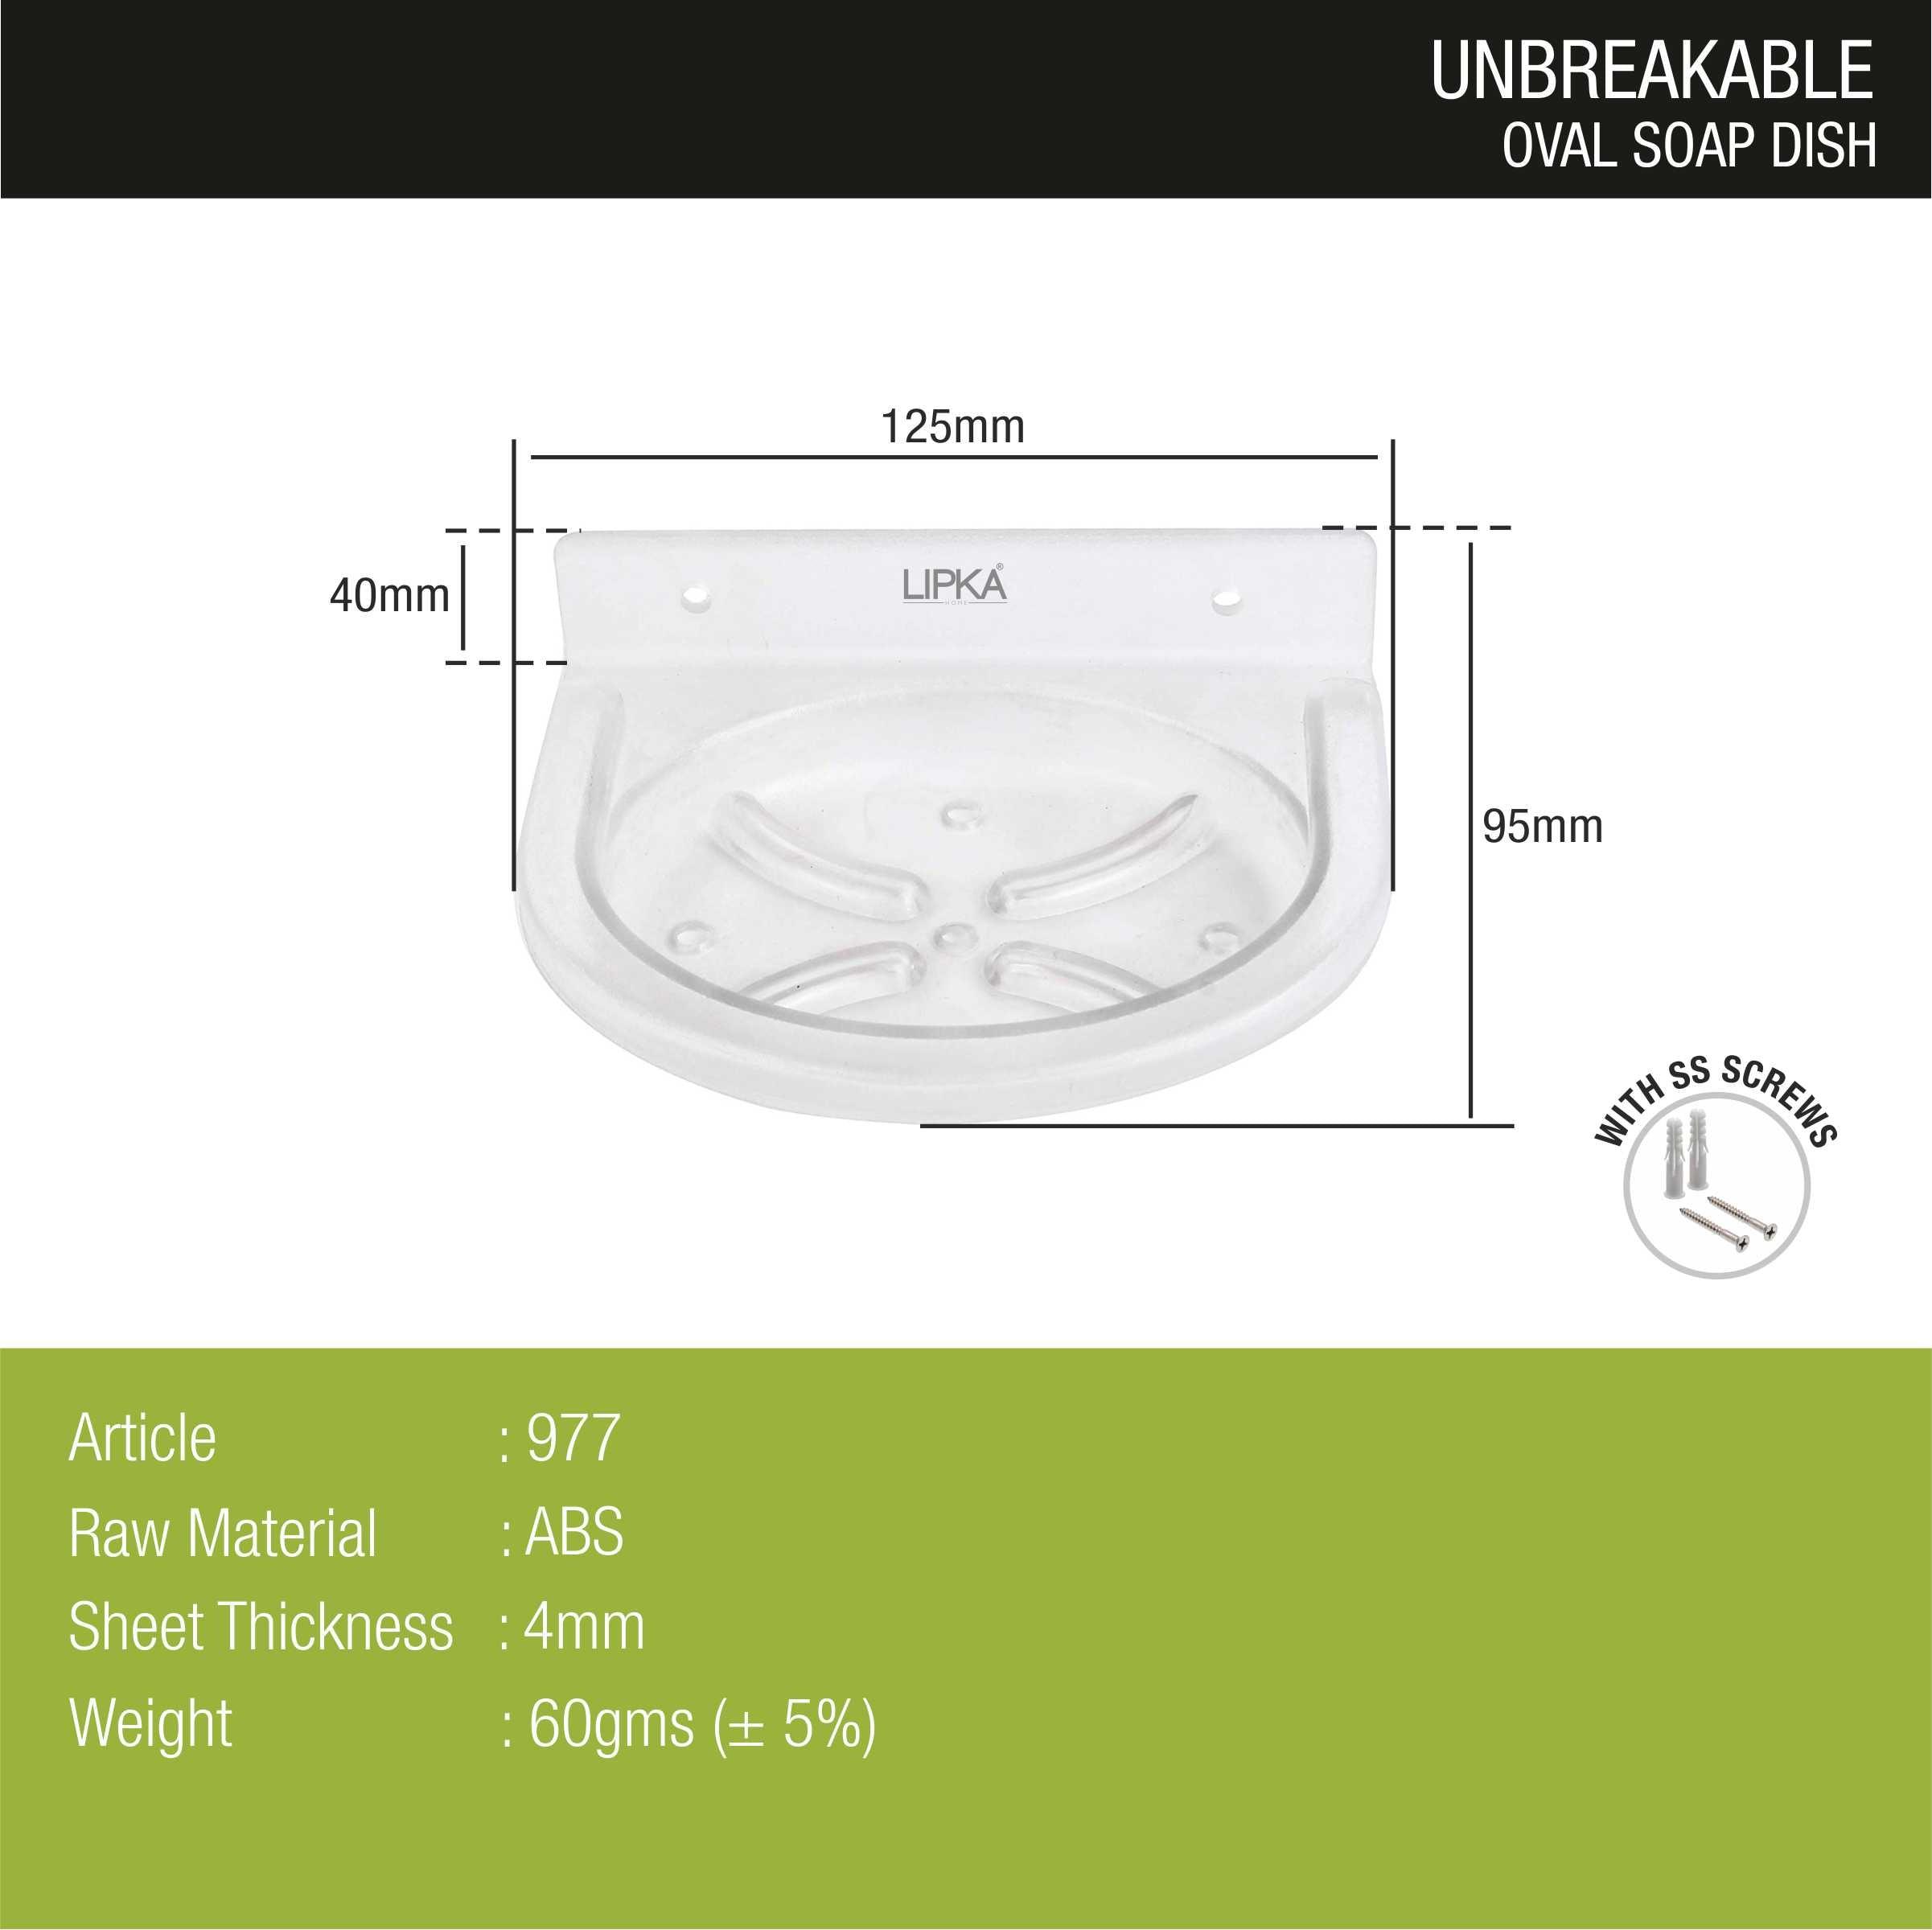 ABS Oval Soap Dish dimensions and sizes